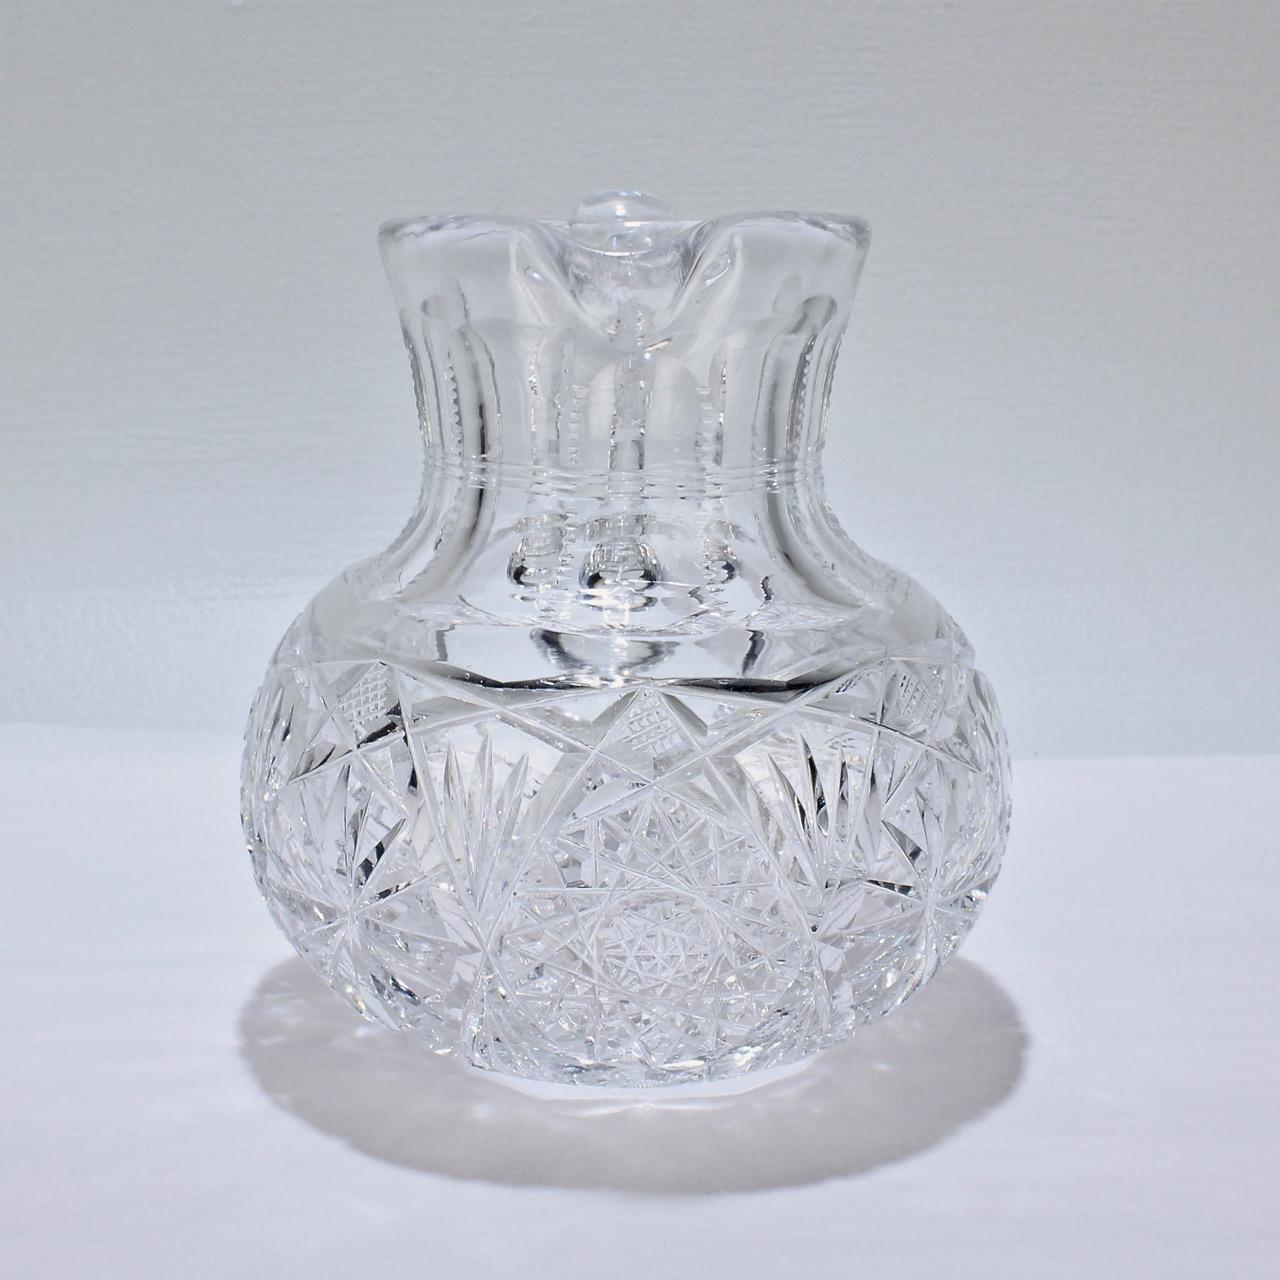 A fine antique small-scale cut glass juice or cocktail pitcher.

The body of the pitcher is bulbous or squat (like a suppressed ball) with deep cuts and a sturdy applied handle. The neck is faceted and the handle has a ribbed cut pattern.

A